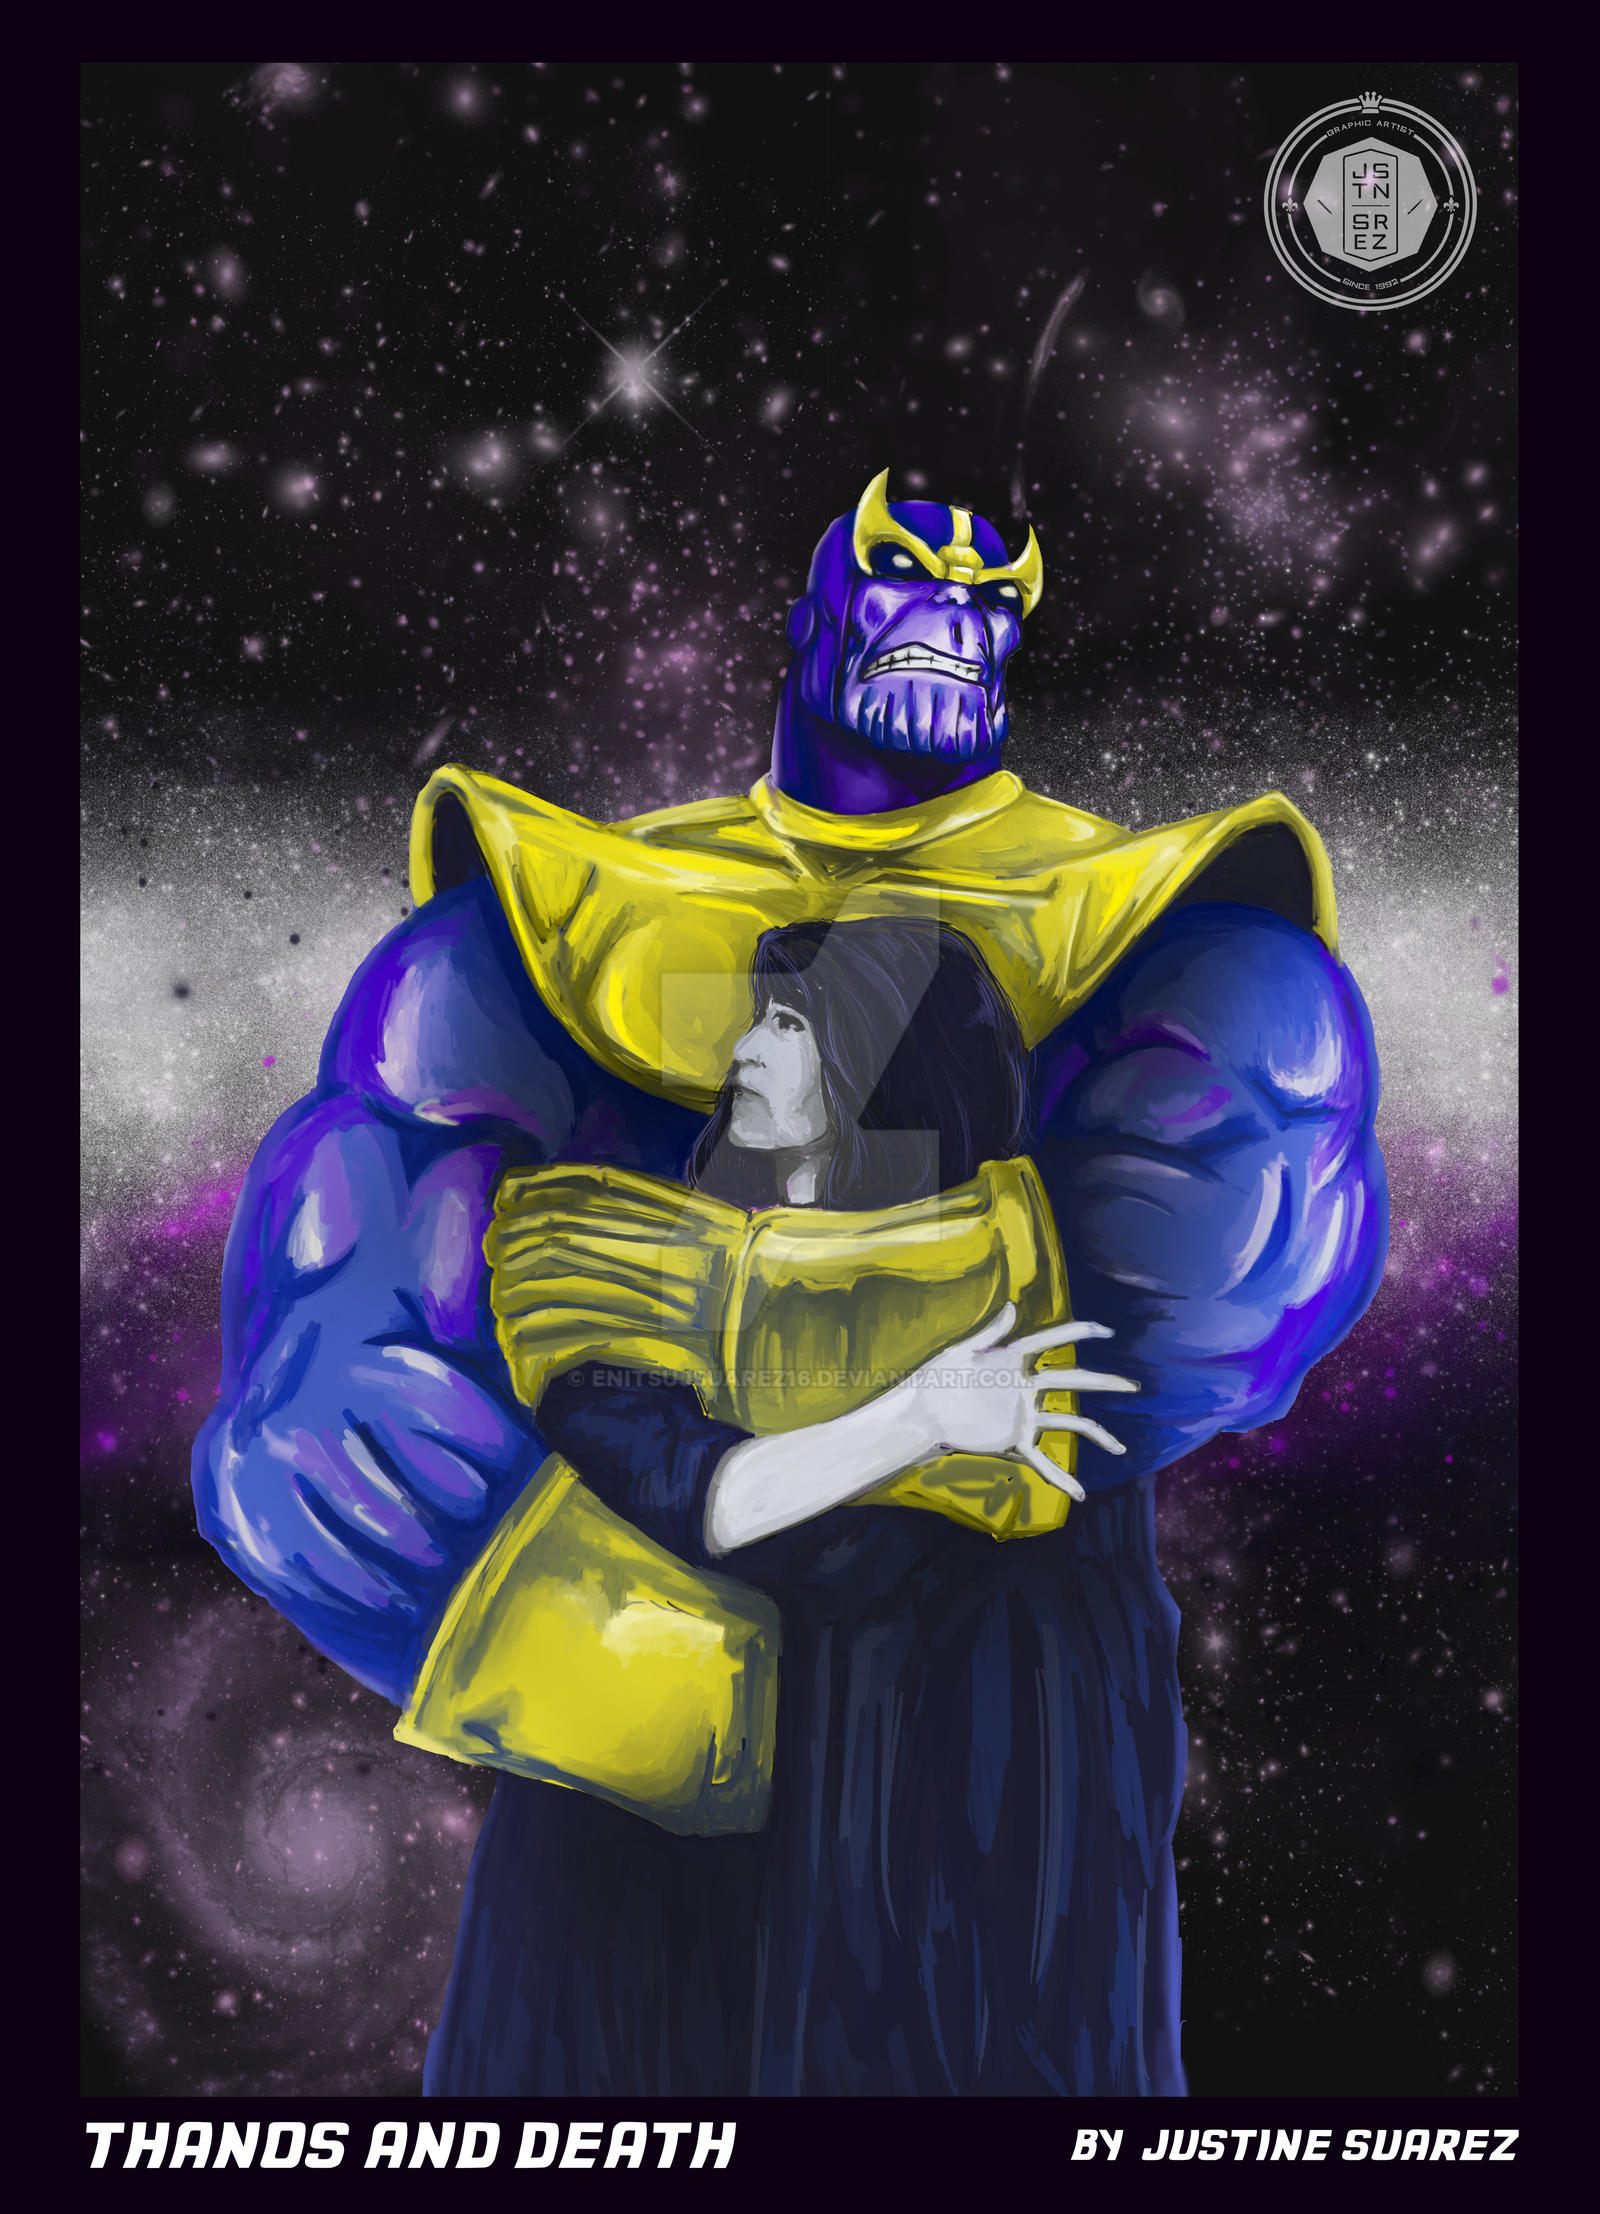 Thanos and Death